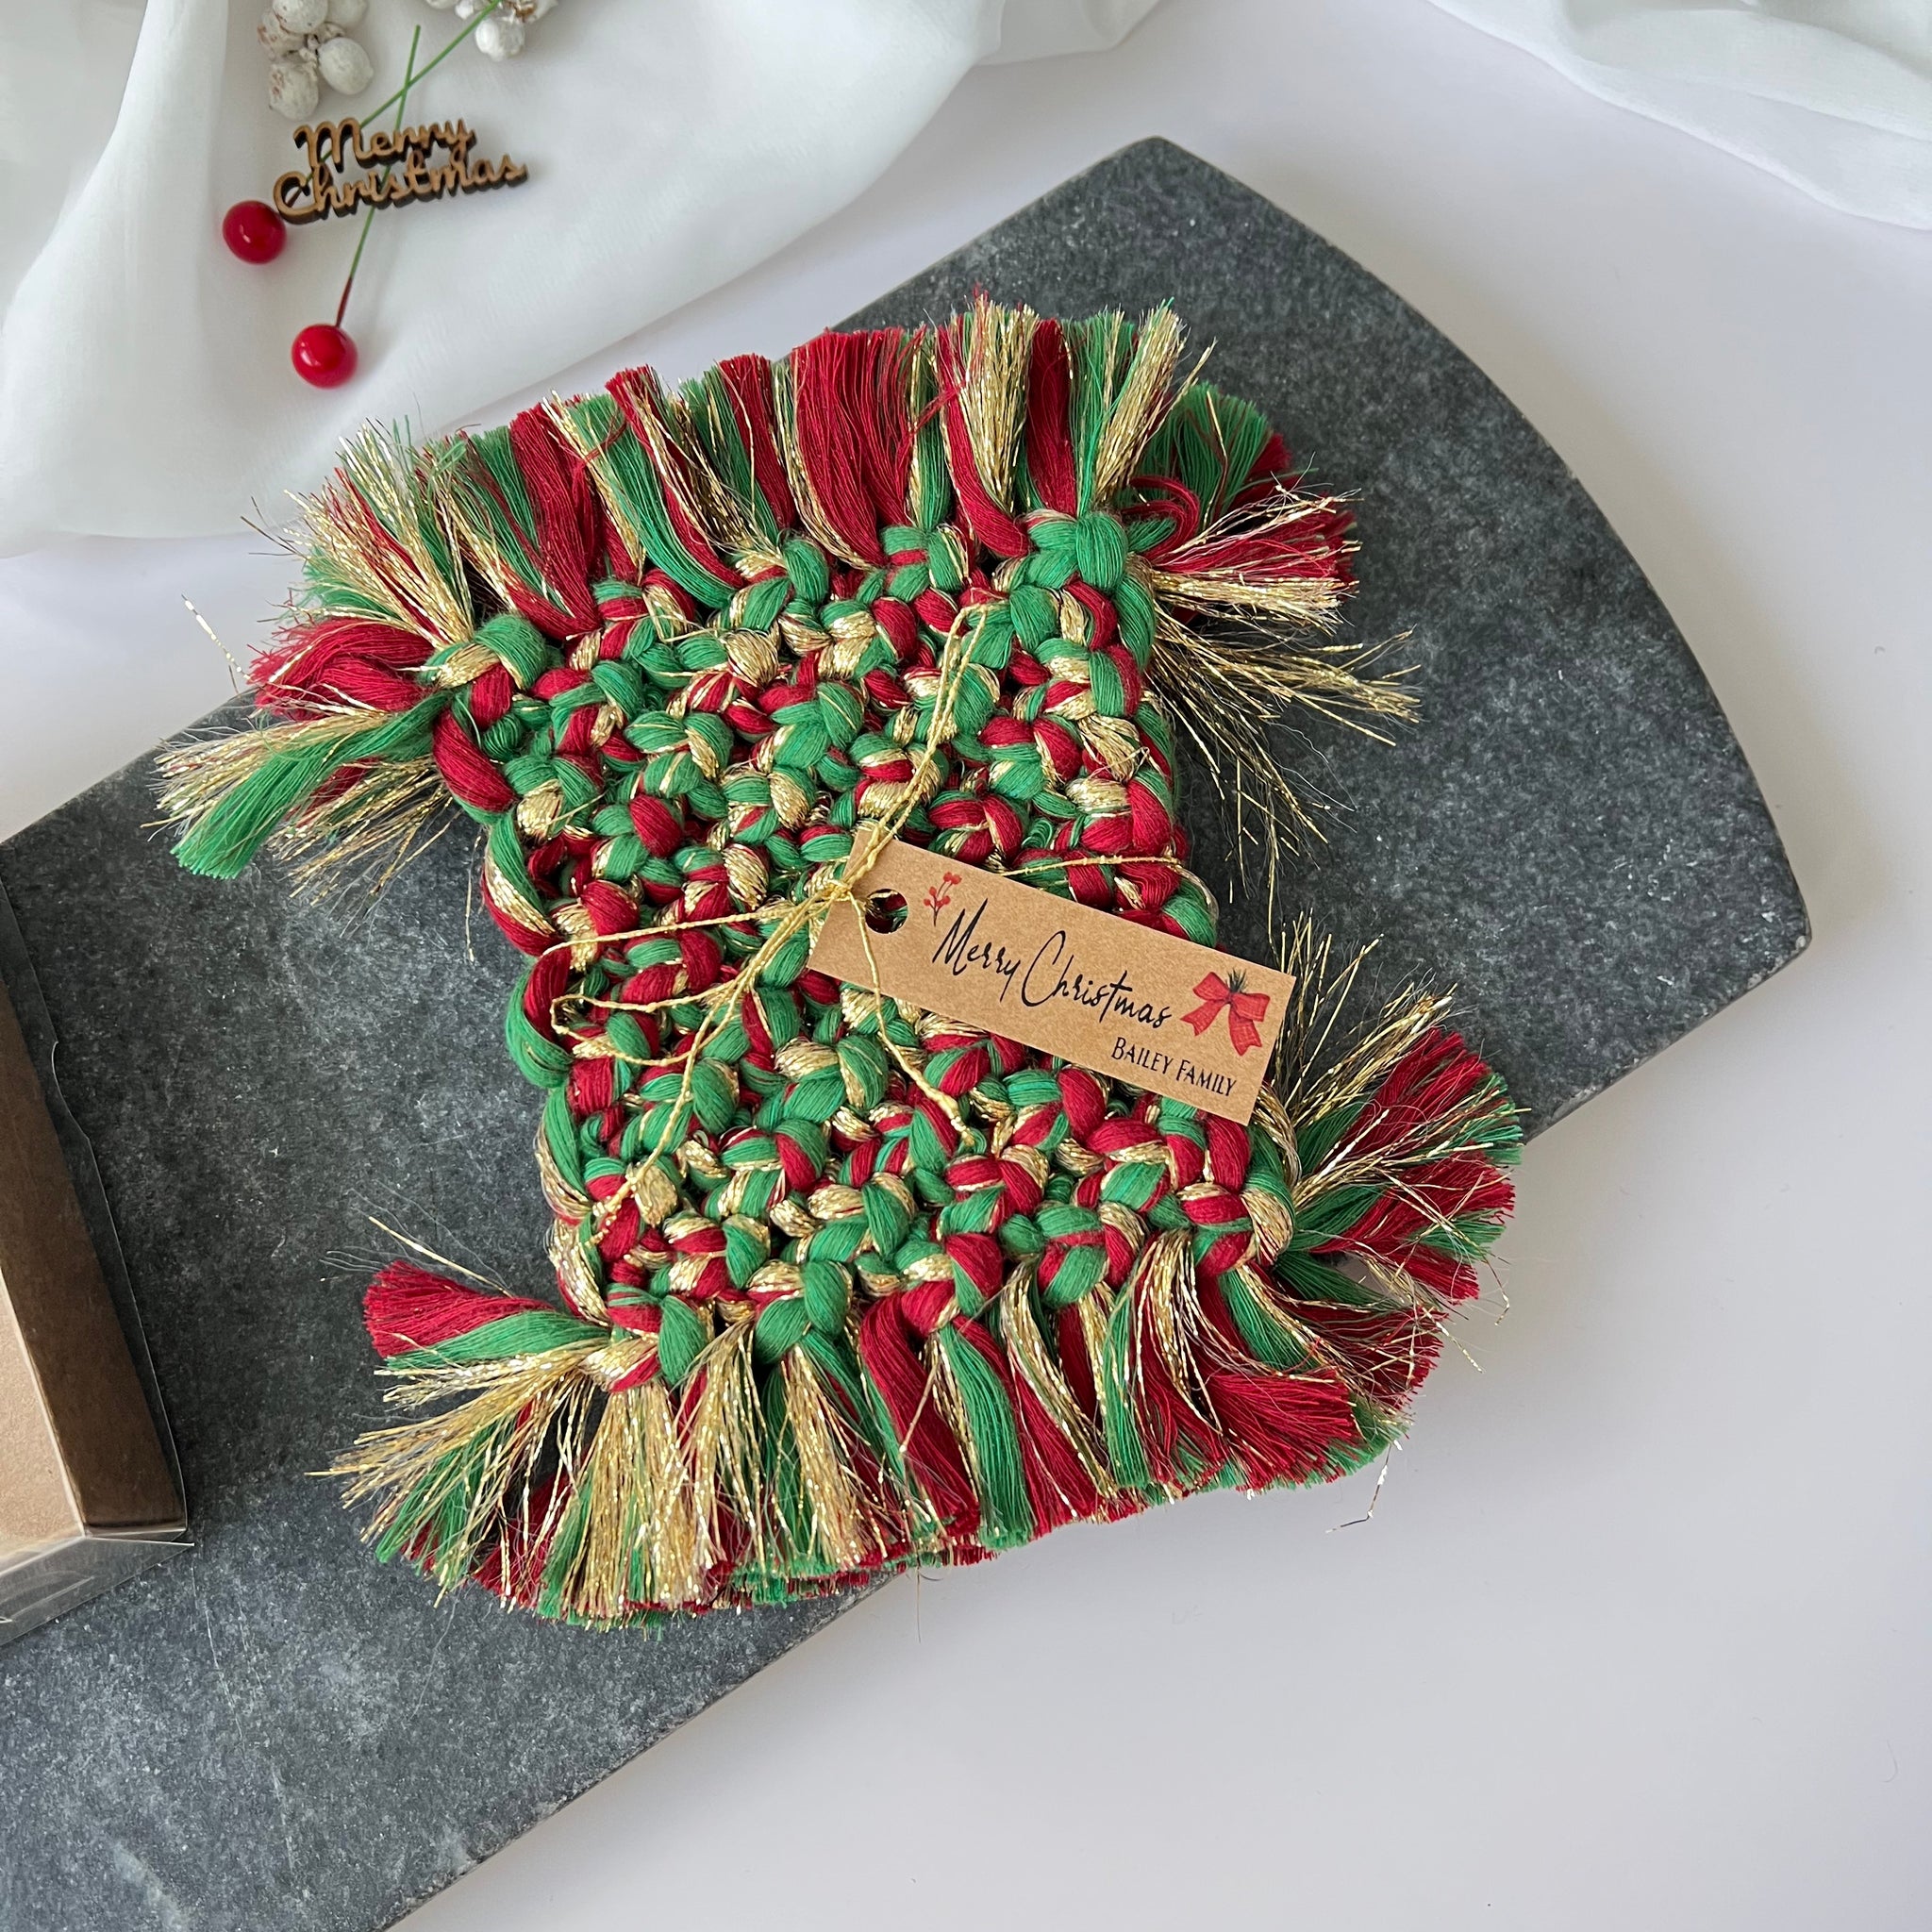 Macrame Coasters - Rustic Christmas Favors and Holiday Gifts